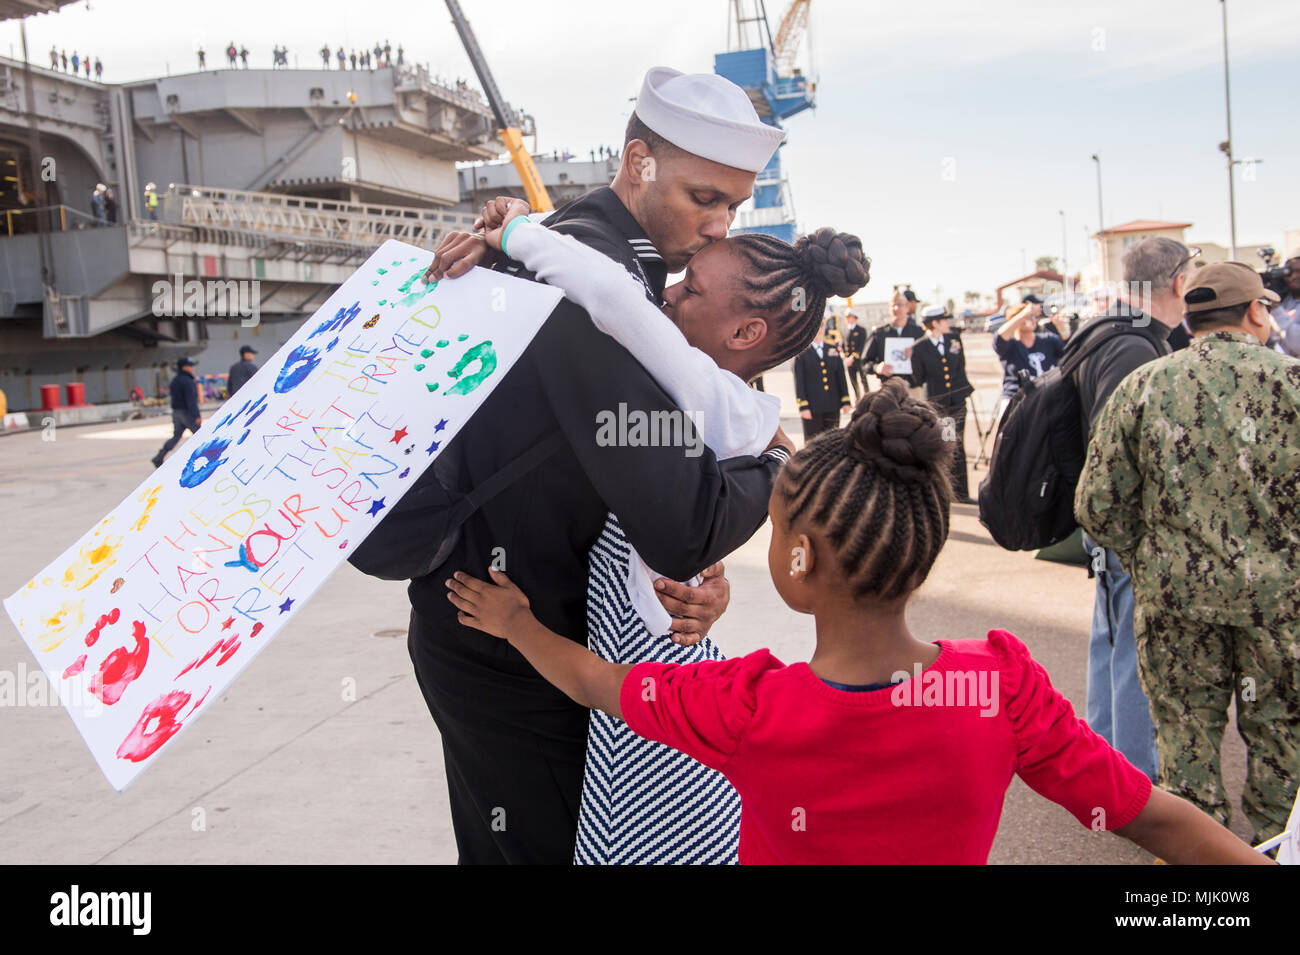 171205-N-BN355-0151  SAN DIEGO (Dec. 05, 2017) Aviation Maintenance Administrationman 1st Class Corey Oliver hugs his daughter after returning from deployment aboard USS Nimitz. The Nimitz Carrier Strike Group is on a regularly scheduled deployment to the Western Pacific. The U.S. Navy has patrolled the Indo-Asia-Pacific region routinely for more than 70 years, prompting peace security. (U.S. Navy photo by Mass Communication Specialist Seaman Apprentice Jailene Casso/Released) Stock Photo